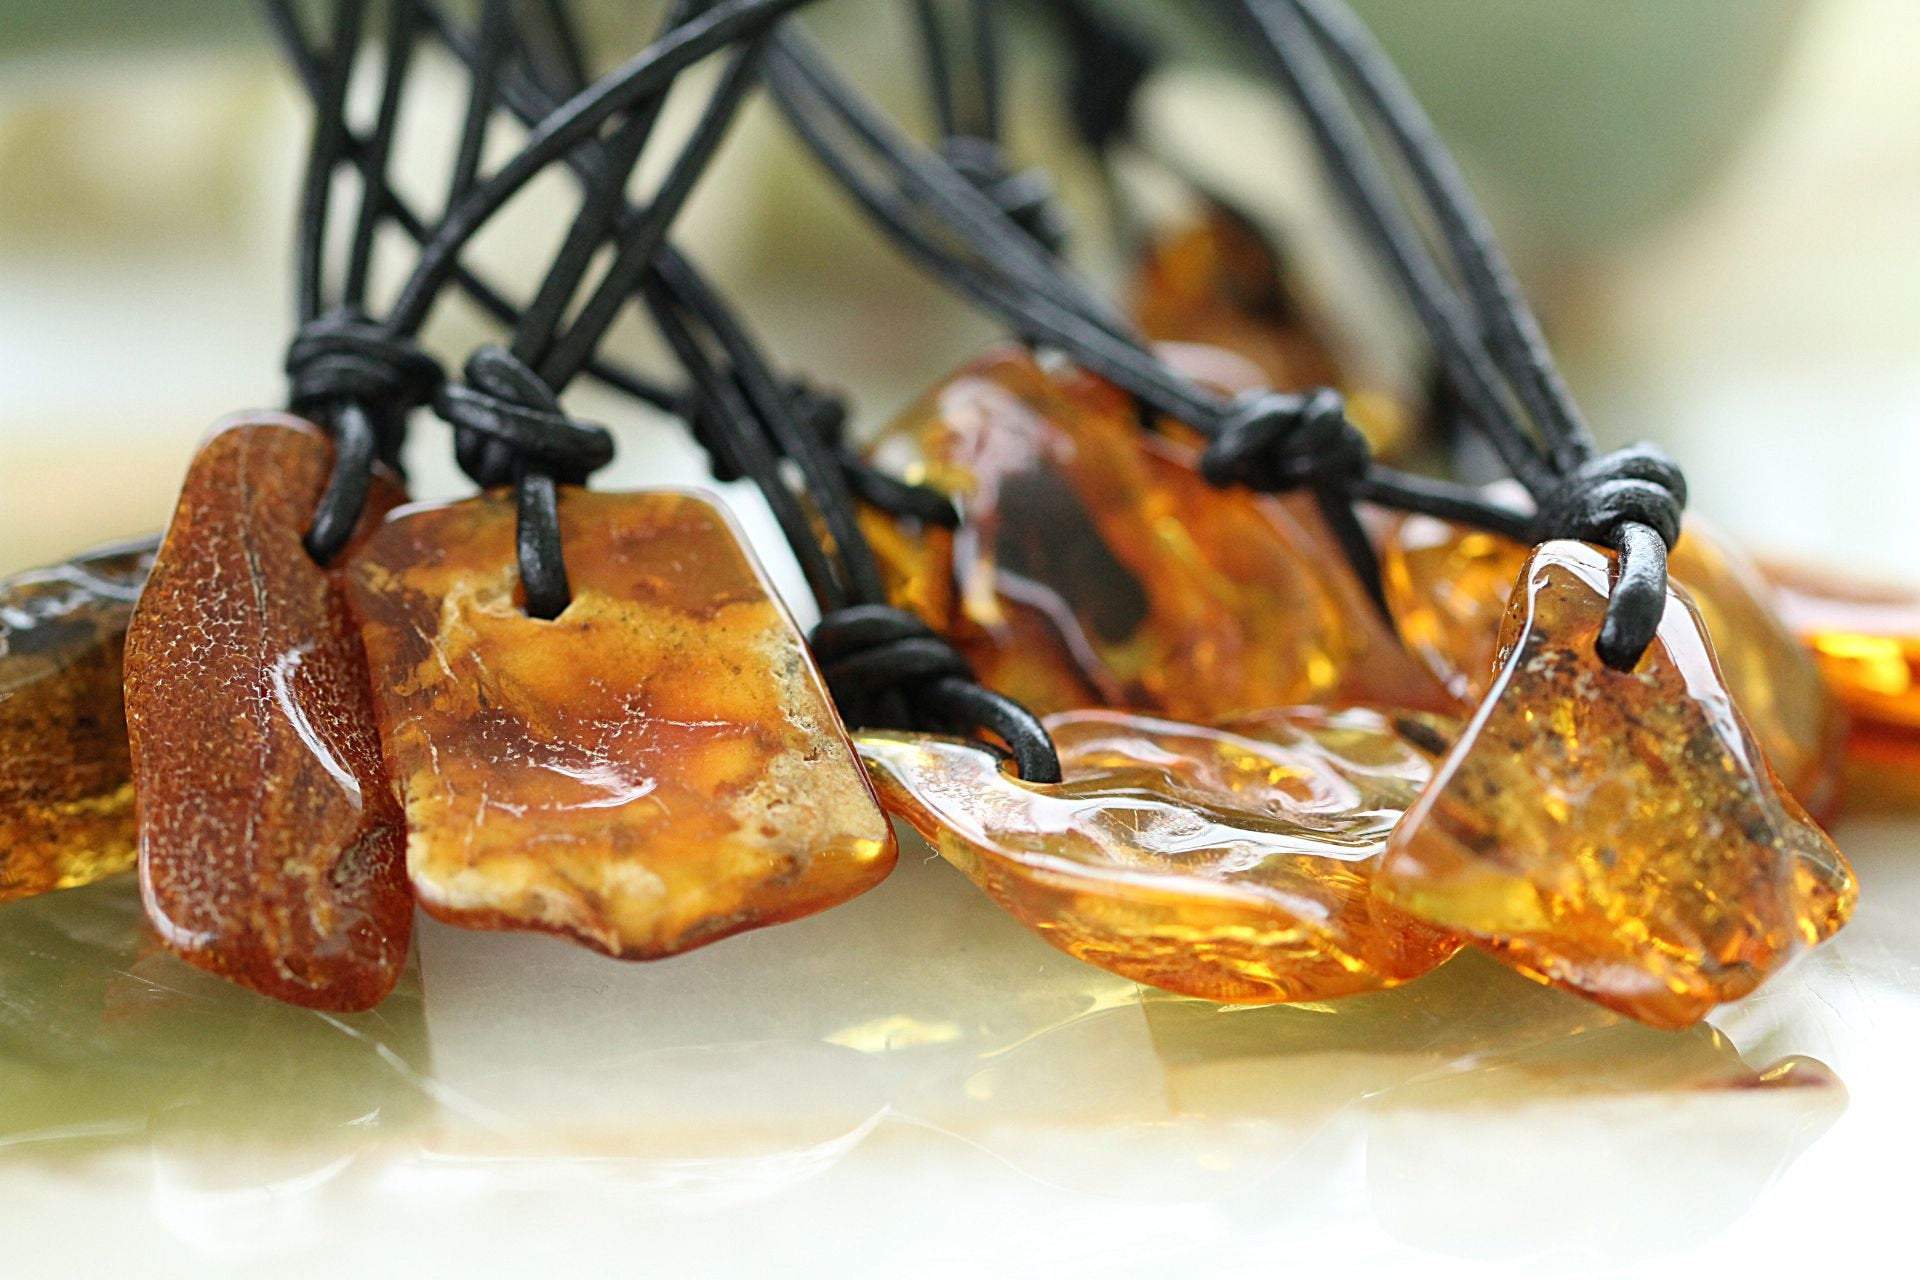 Amber Amulet Gift for Wellness/ Natural Jewelry /Polished Tumbled Gem Necklace for Protection / Natural Nordic Baltic Amber Stone Pendant - Amber SOS